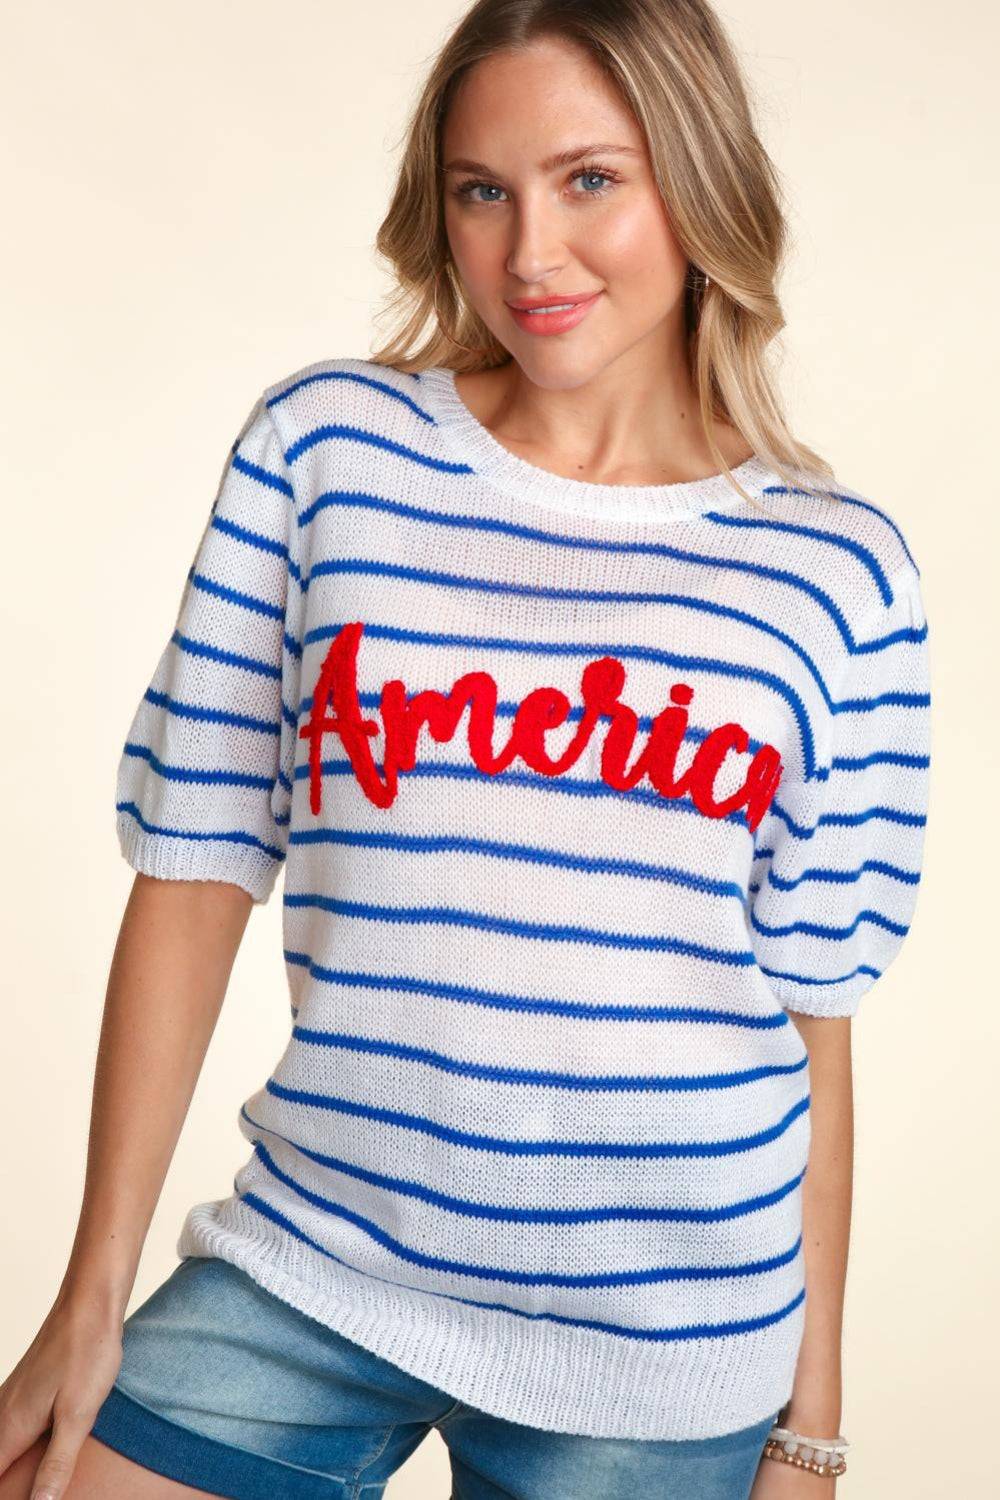 a woman wearing a sweater with the word america on it